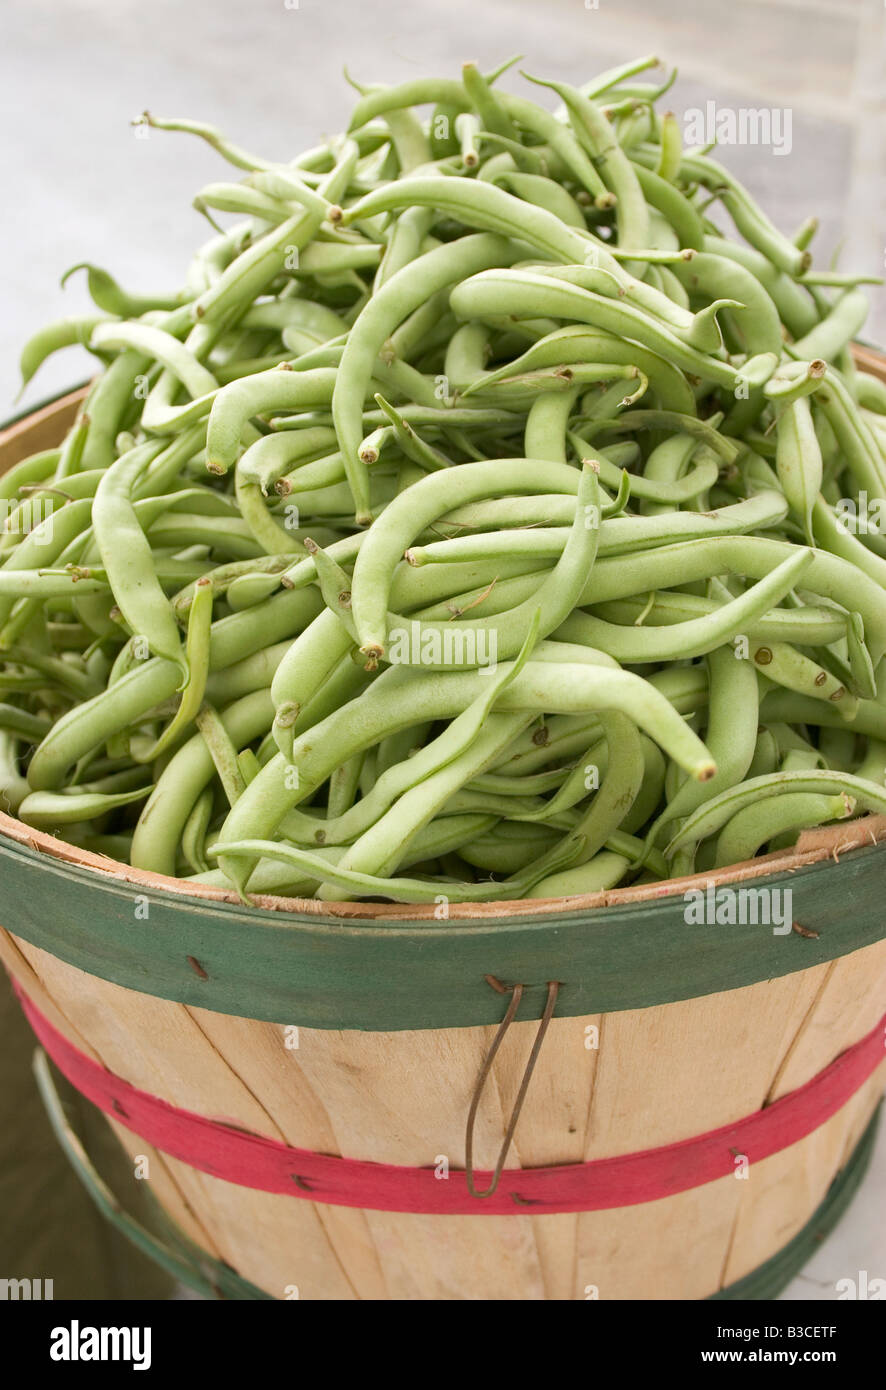 How Much Is A Bushel Of Green Beans Cost - canvas-zone How Much Is A Bushel Of Green Beans